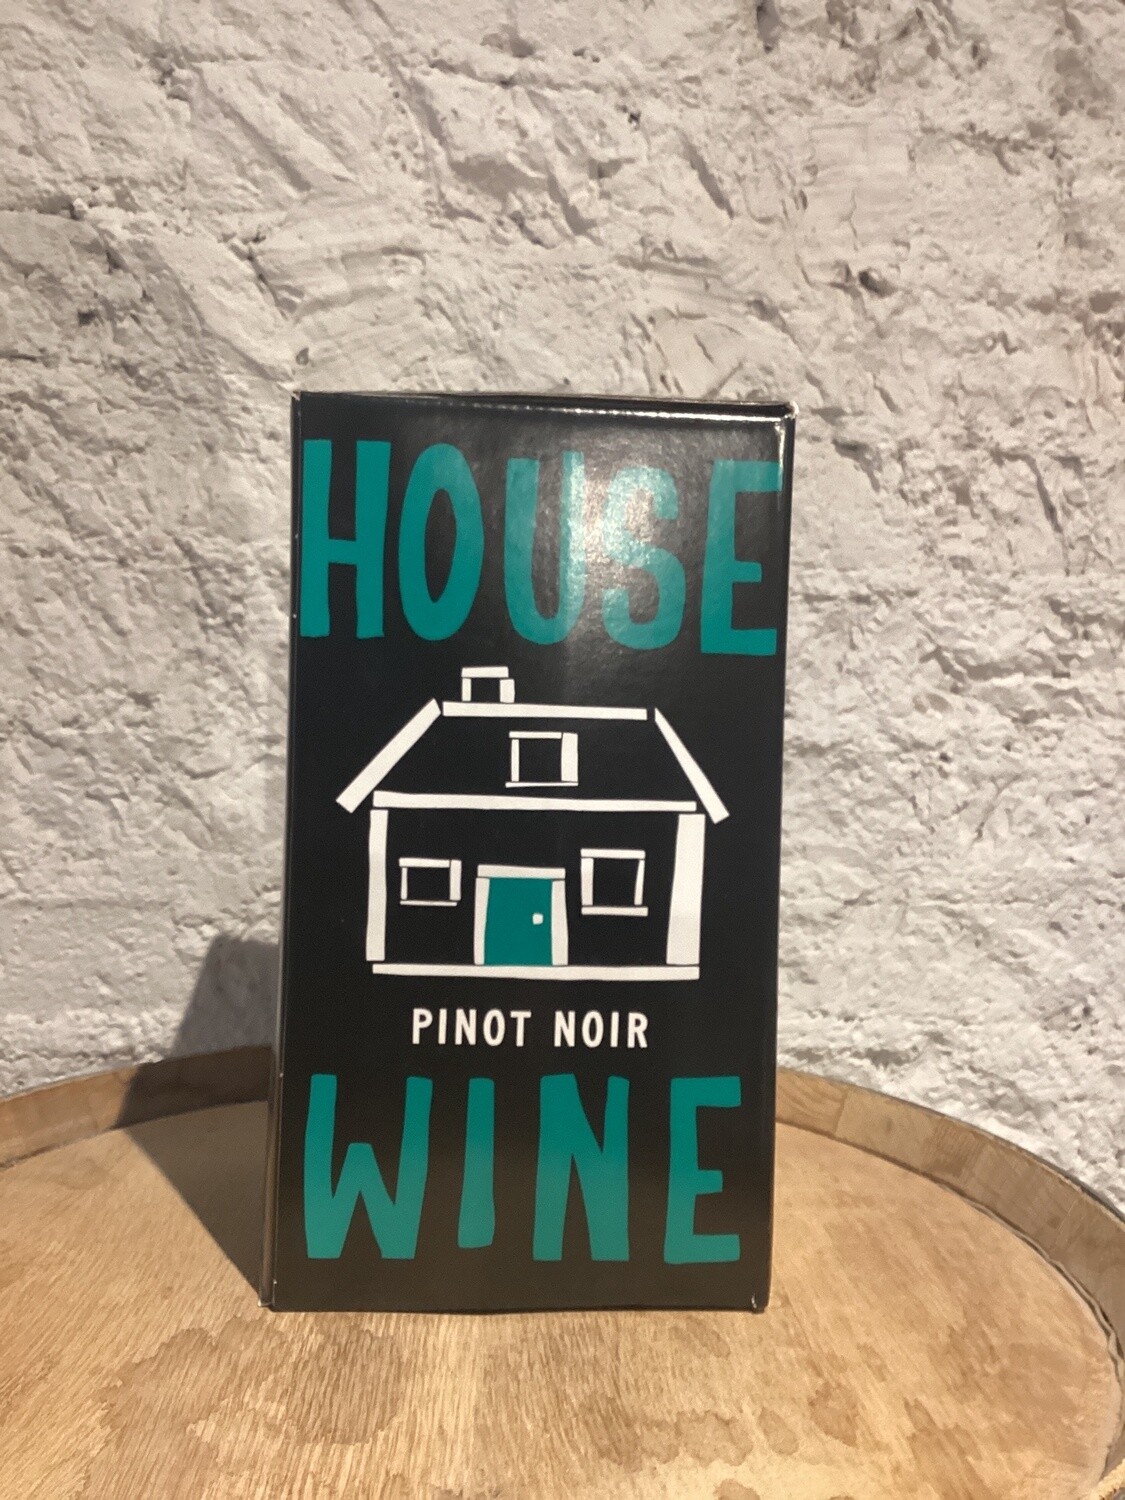 Original House Wine 'House Wine' Pinot Noir Central Valley, Chile (NV), Size: 3L